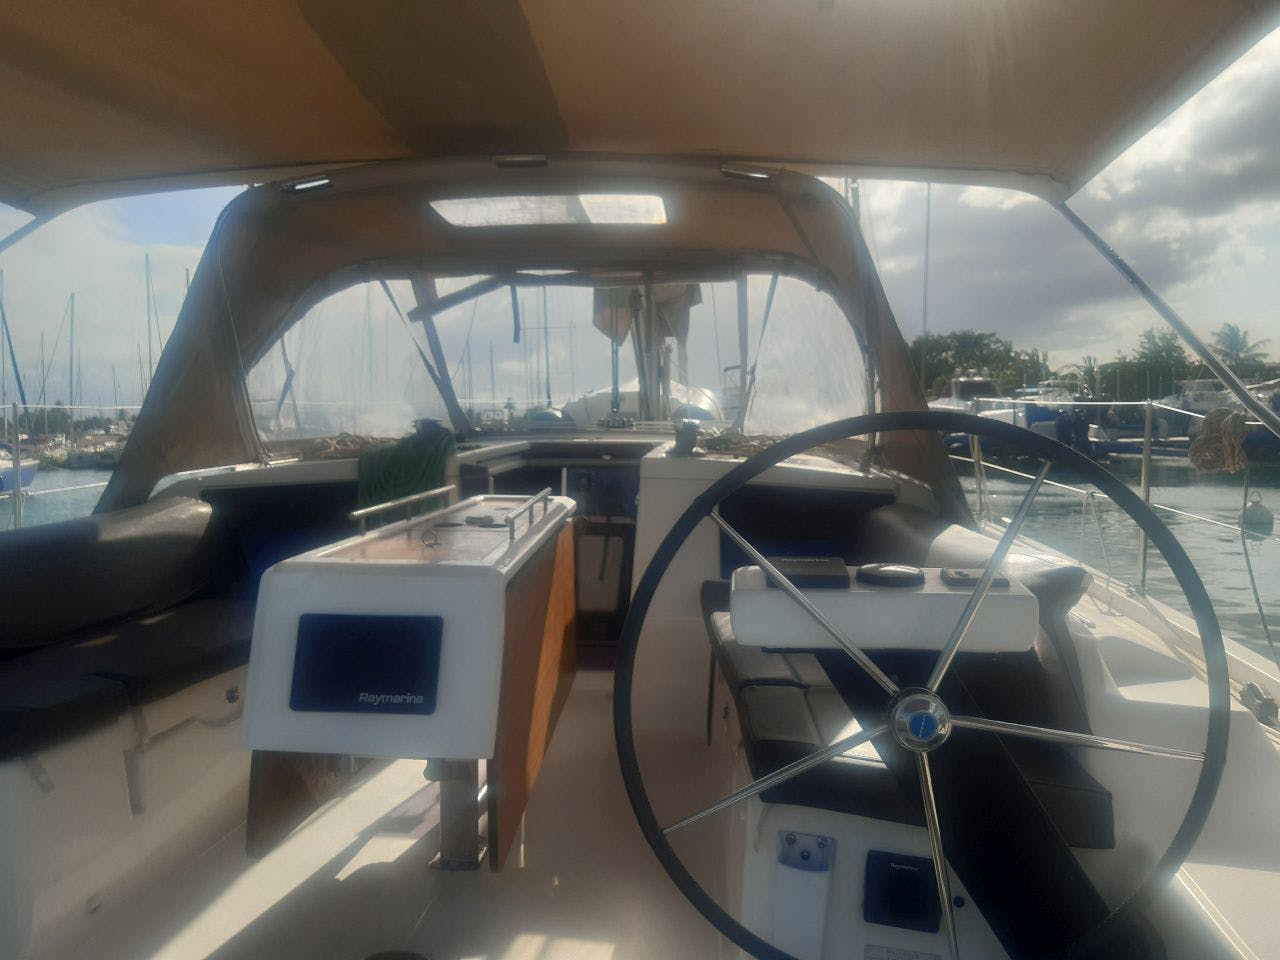 Book Dufour 390 GL Sailing yacht for bareboat charter in Martinique, Le Marin, Martinique, Caribbean with TripYacht!, picture 3